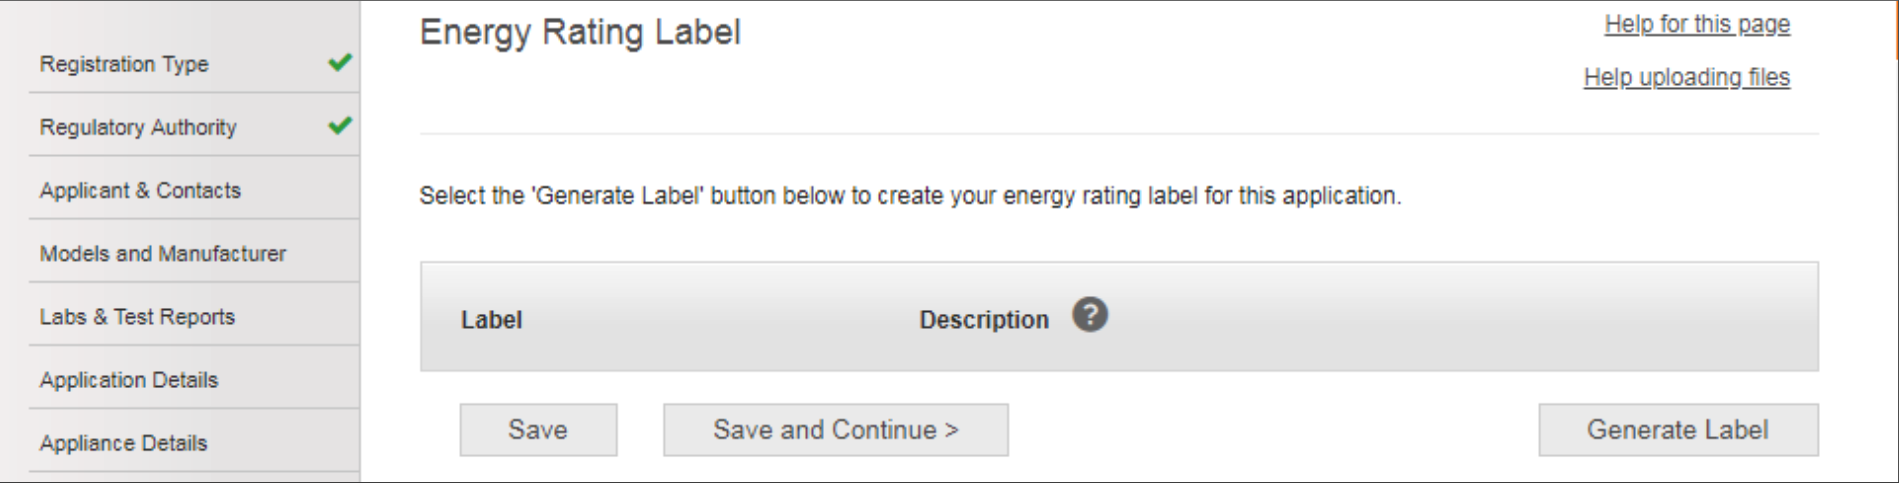 Screenshot 2 of the label page when filling out a registration